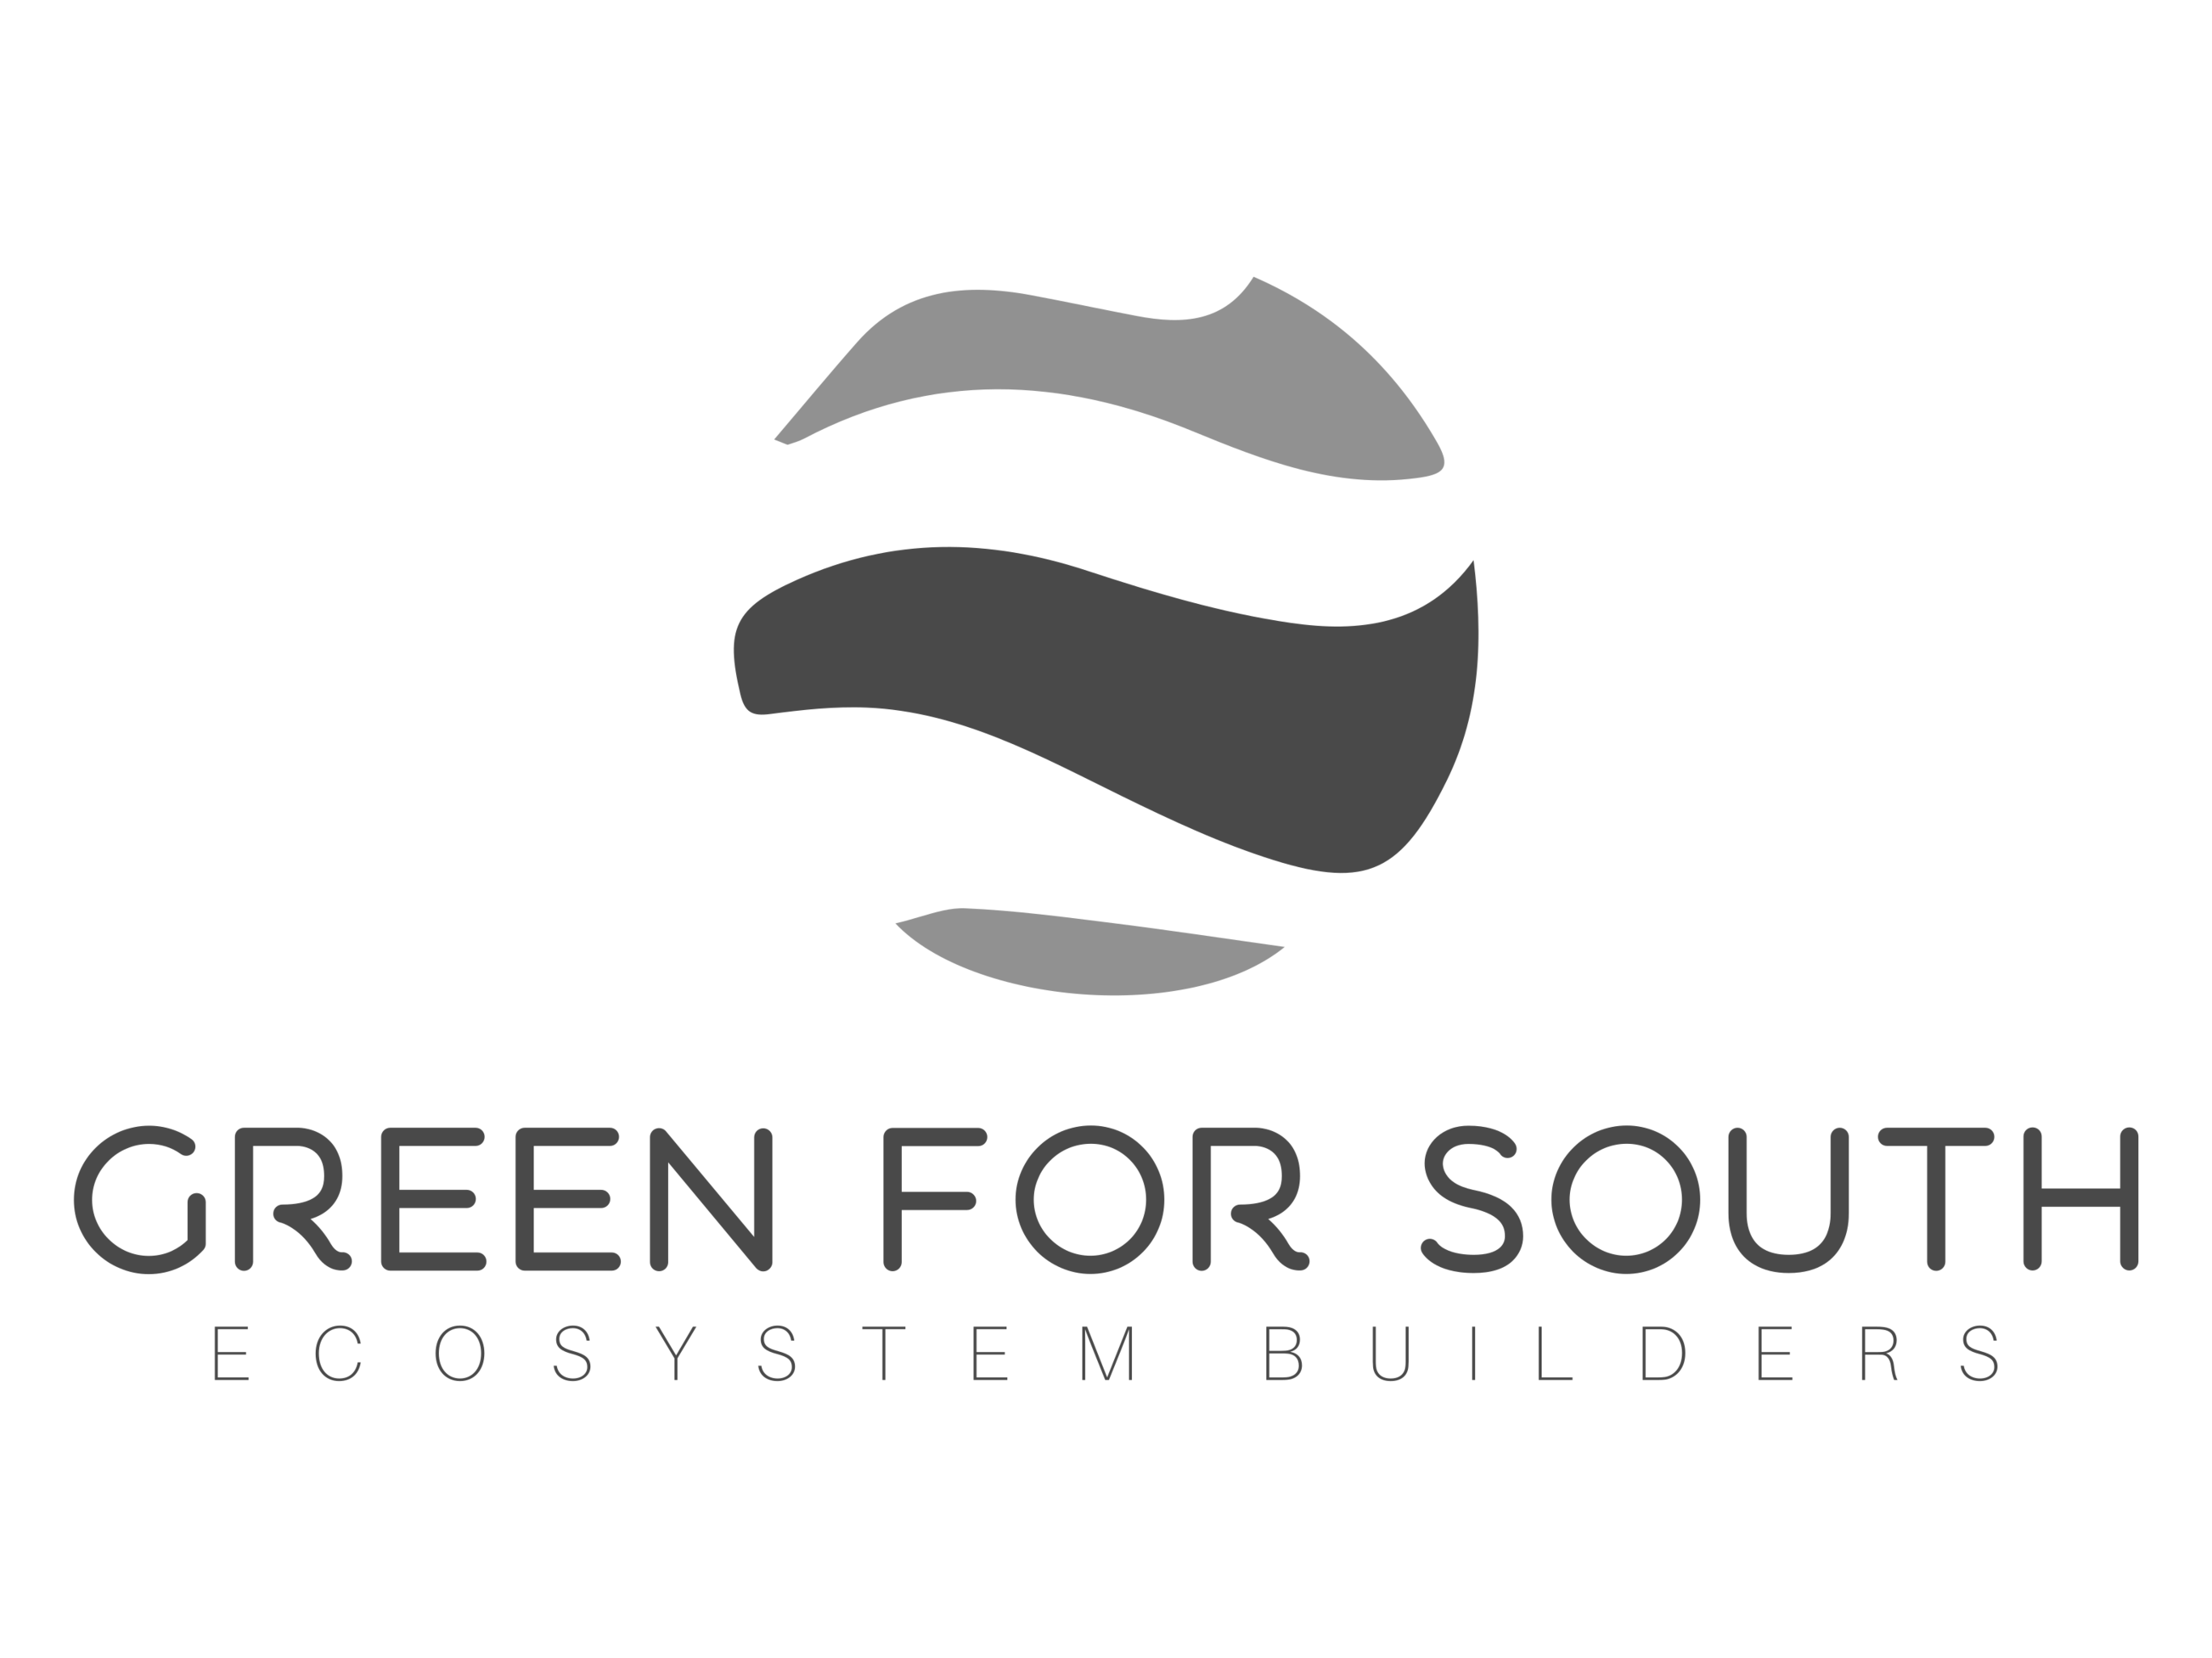 Greenforthesouth